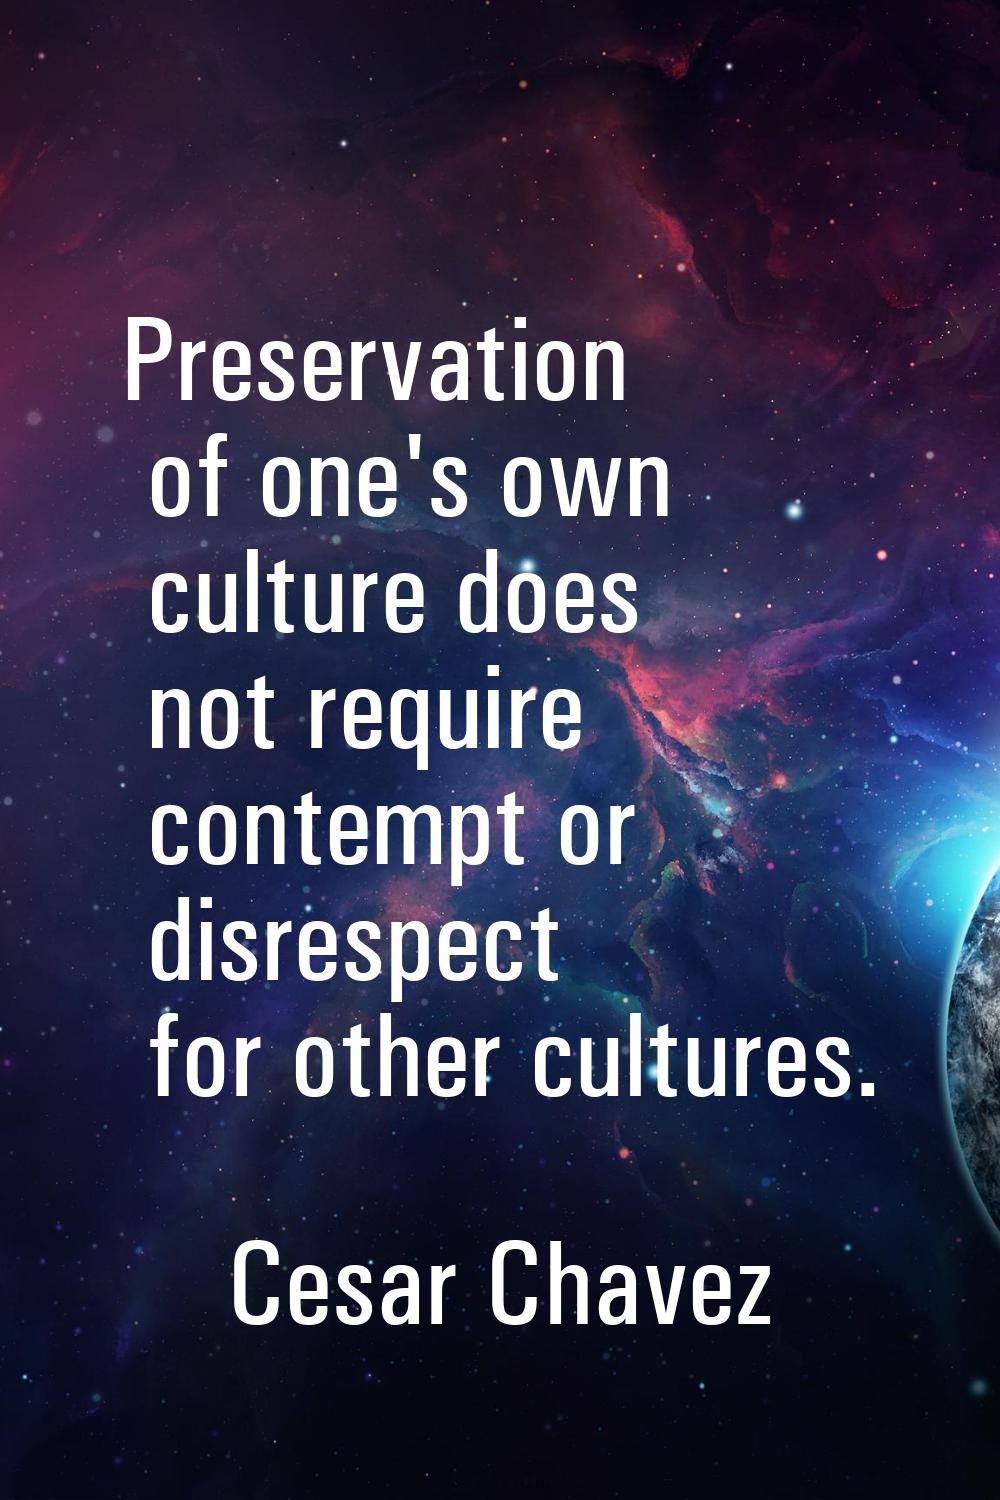 Preservation of one's own culture does not require contempt or disrespect for other cultures.